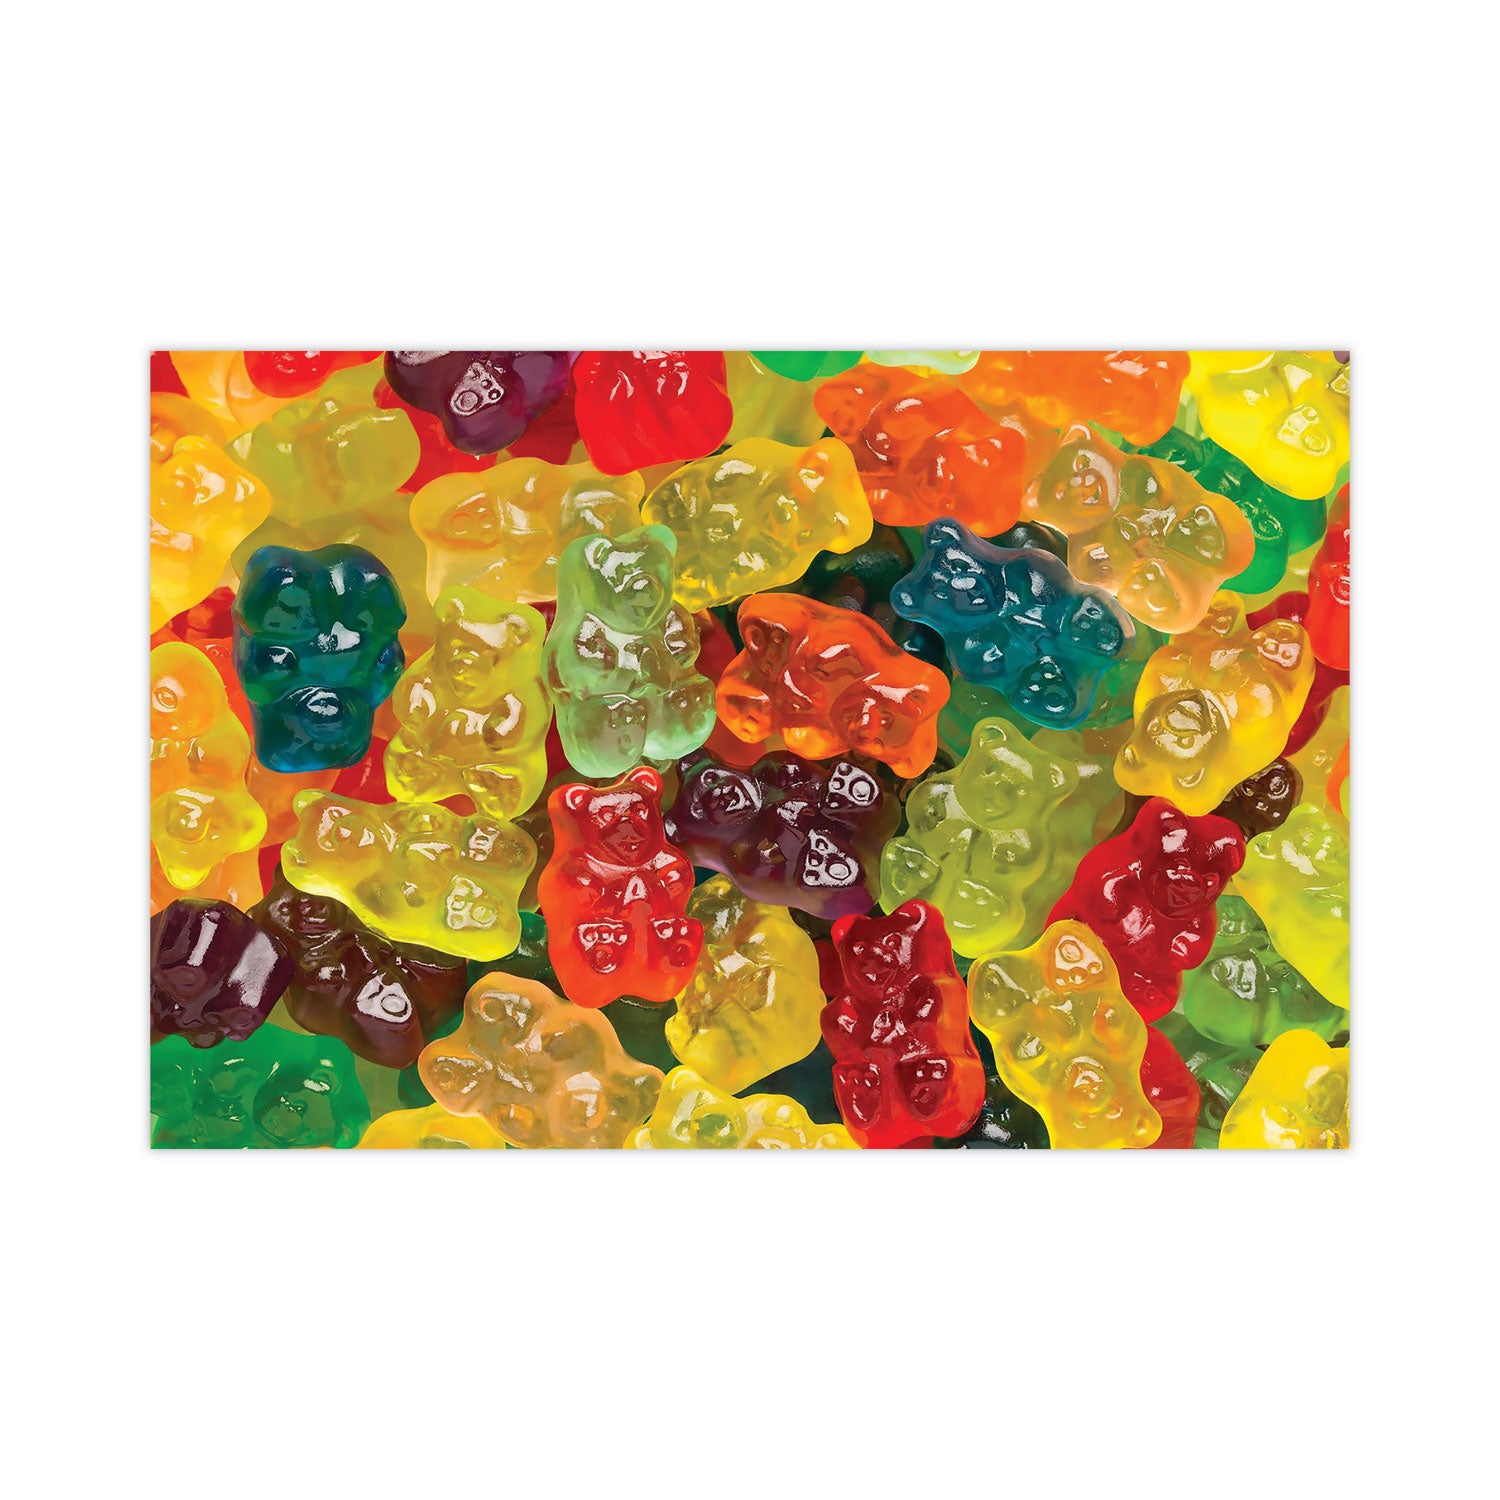 gummi-bears-5-lb-pouch-assorted-ships-in-1-3-business-days_grr20600001 - 2